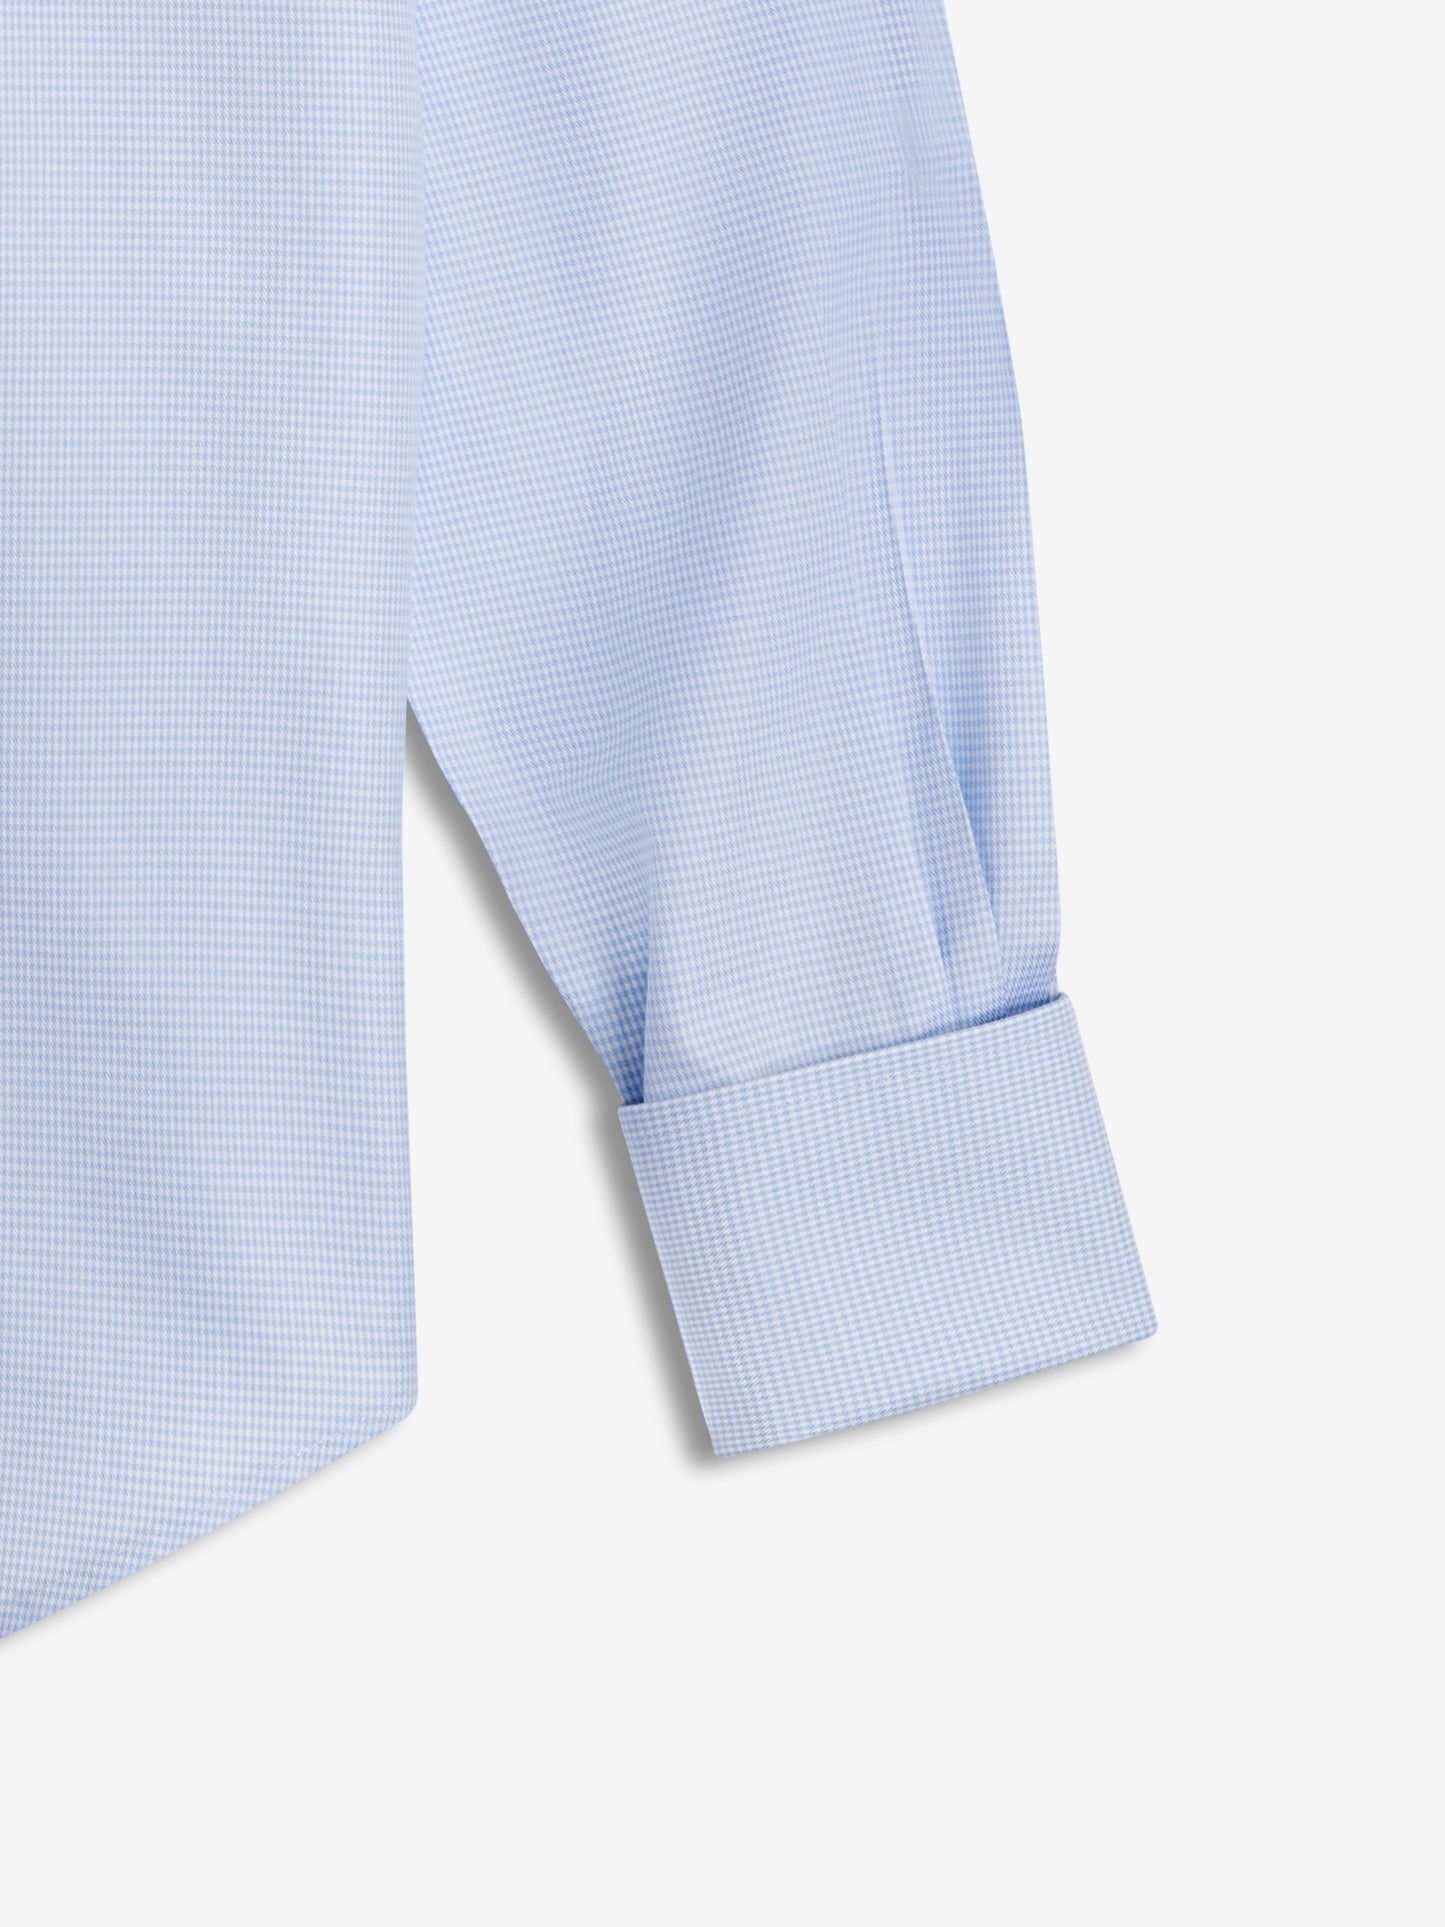 Image 9 of Non-Iron Light Blue Dogtooth Twill Slim Fit Double Cuff Classic Collar Shirt